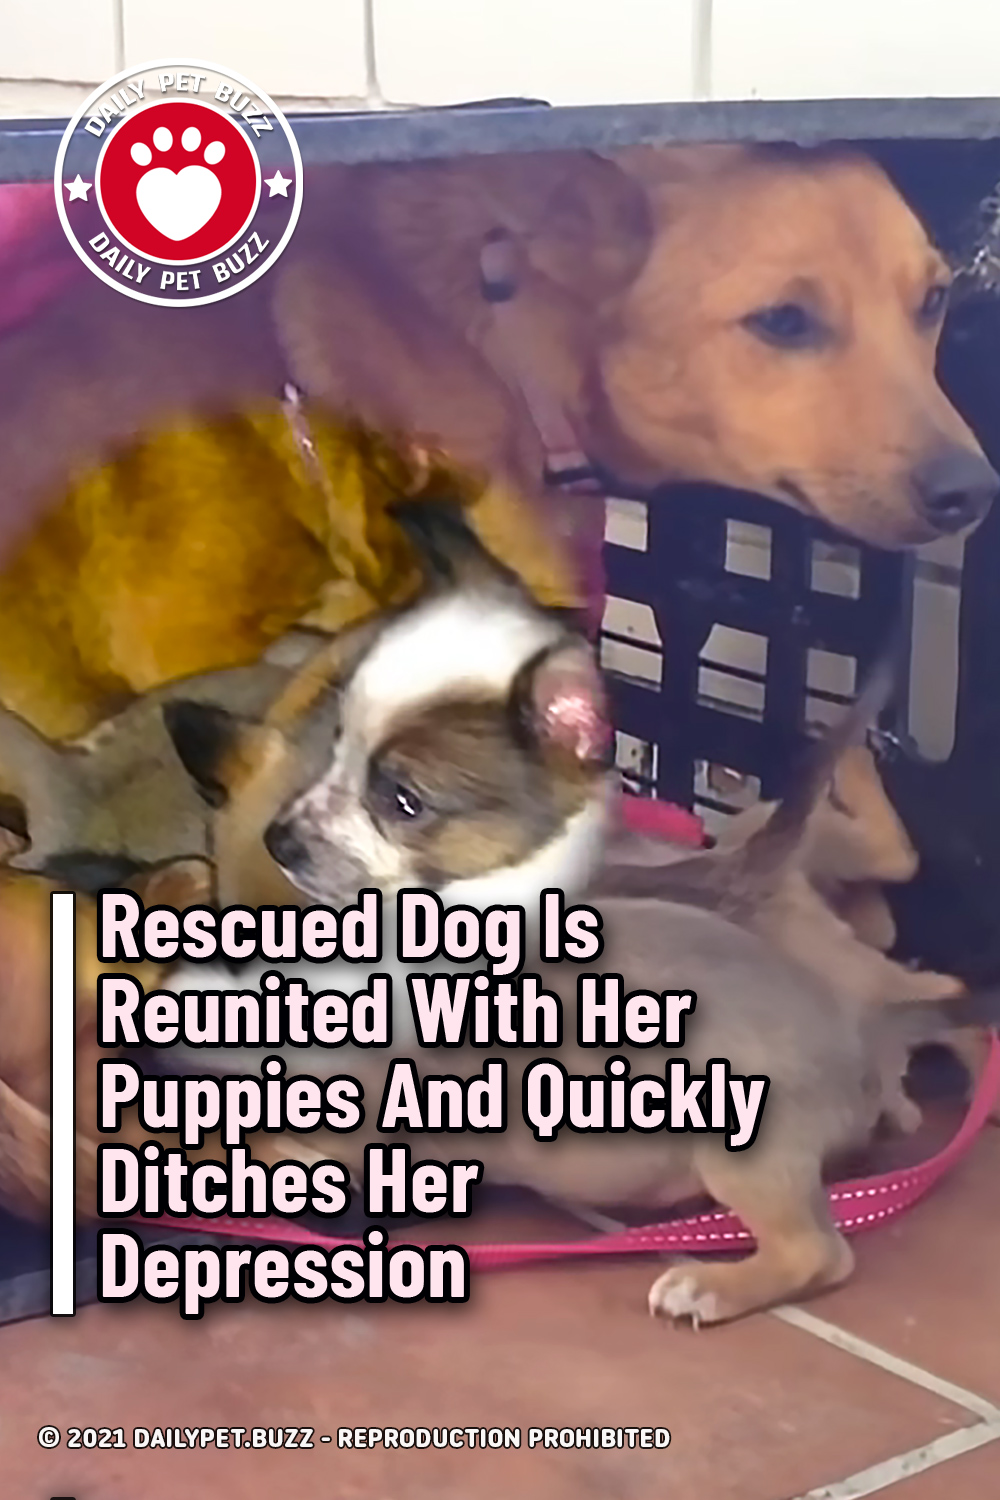 Rescued Dog Is Reunited With Her Puppies And Quickly Ditches Her Depression